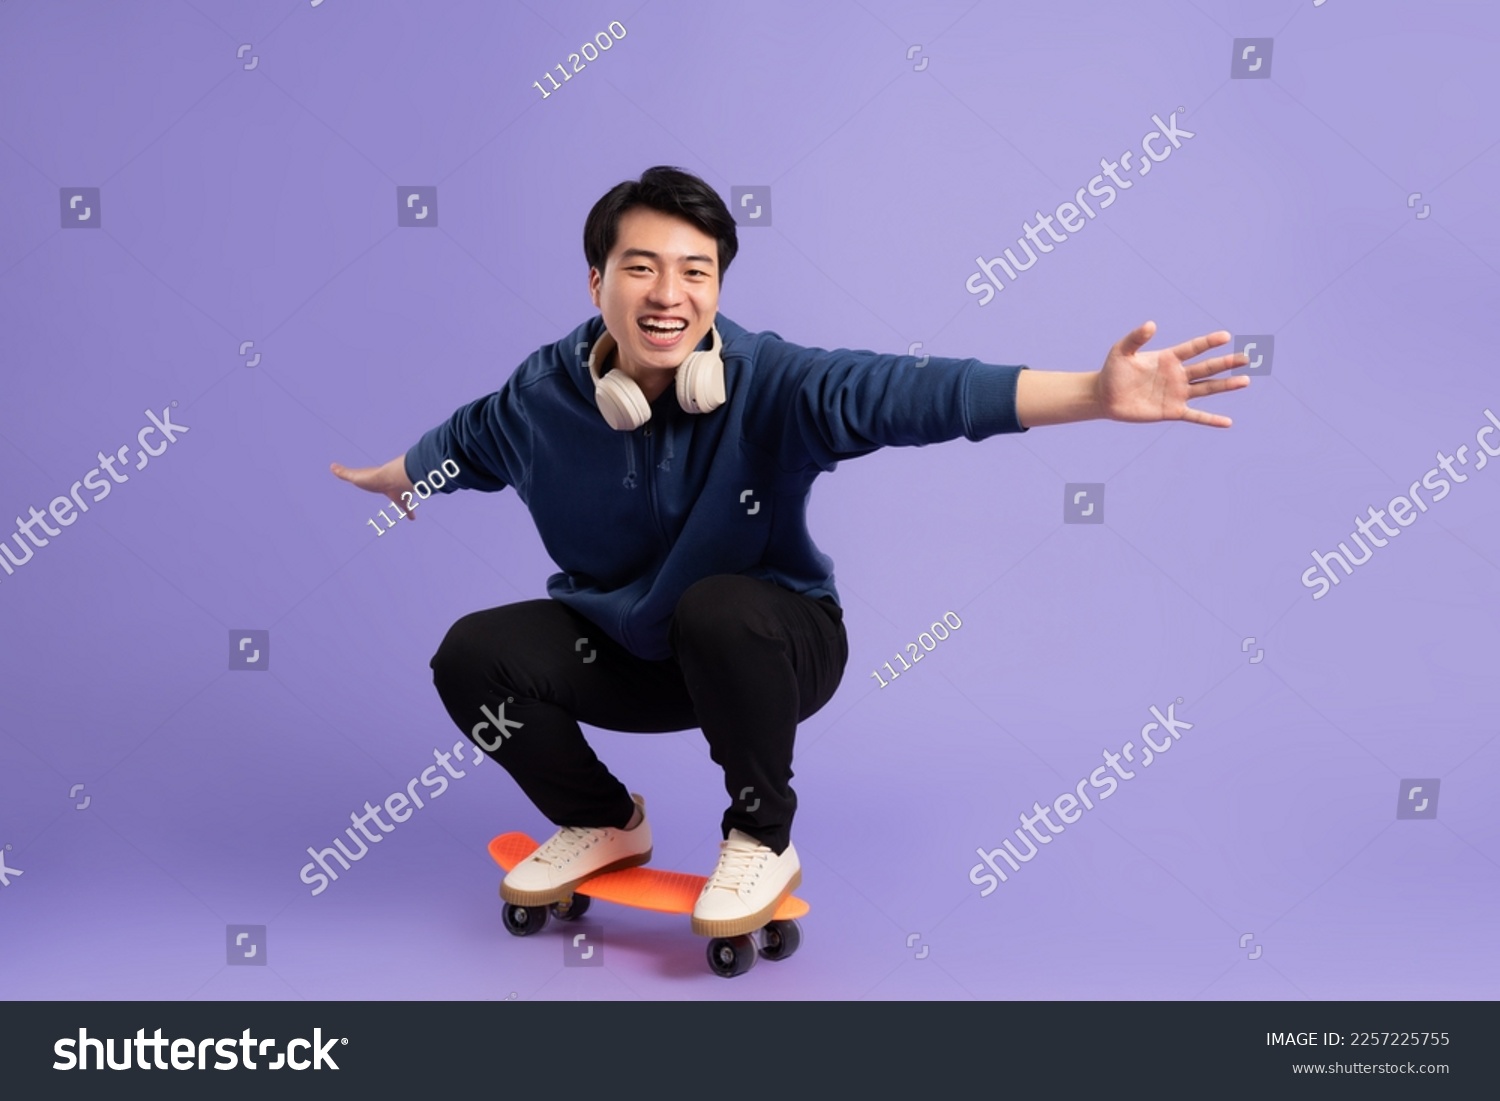 Image of young Asian man playing skateboard on purple background #2257225755